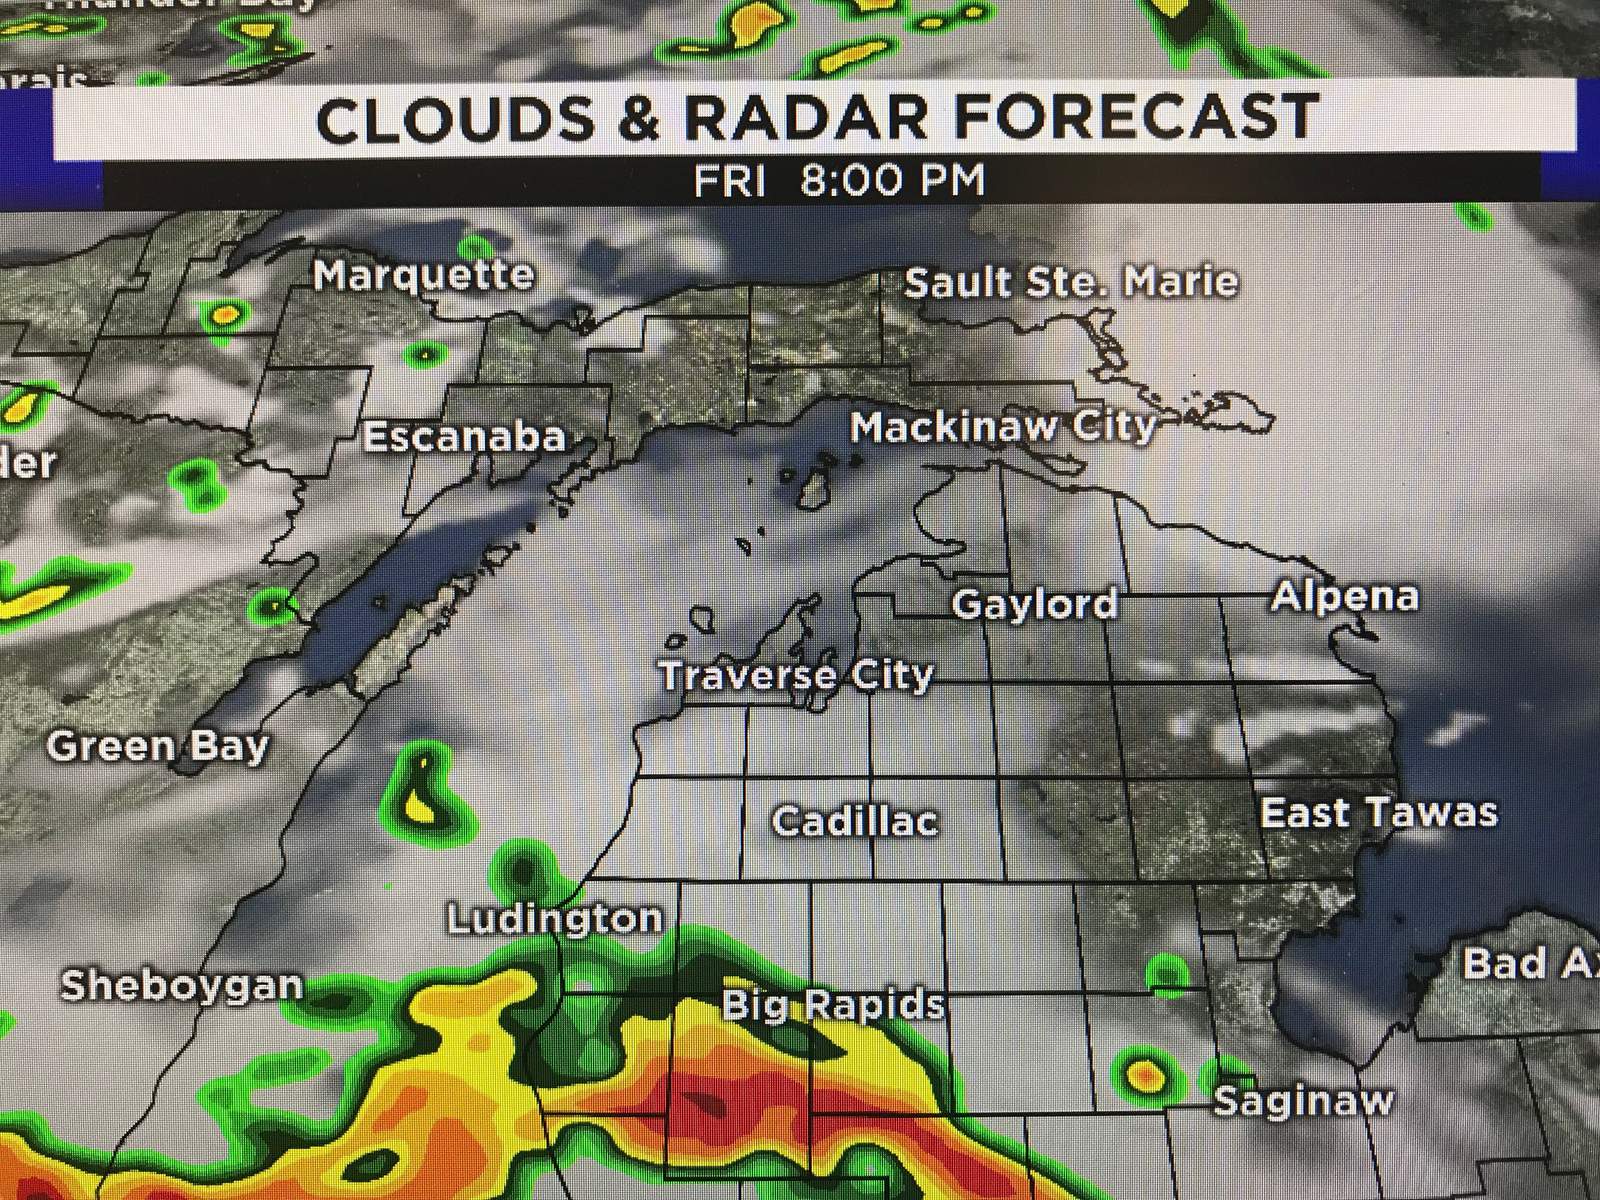 Northern Michigan weather forecast: Severe threat is shifting farther south